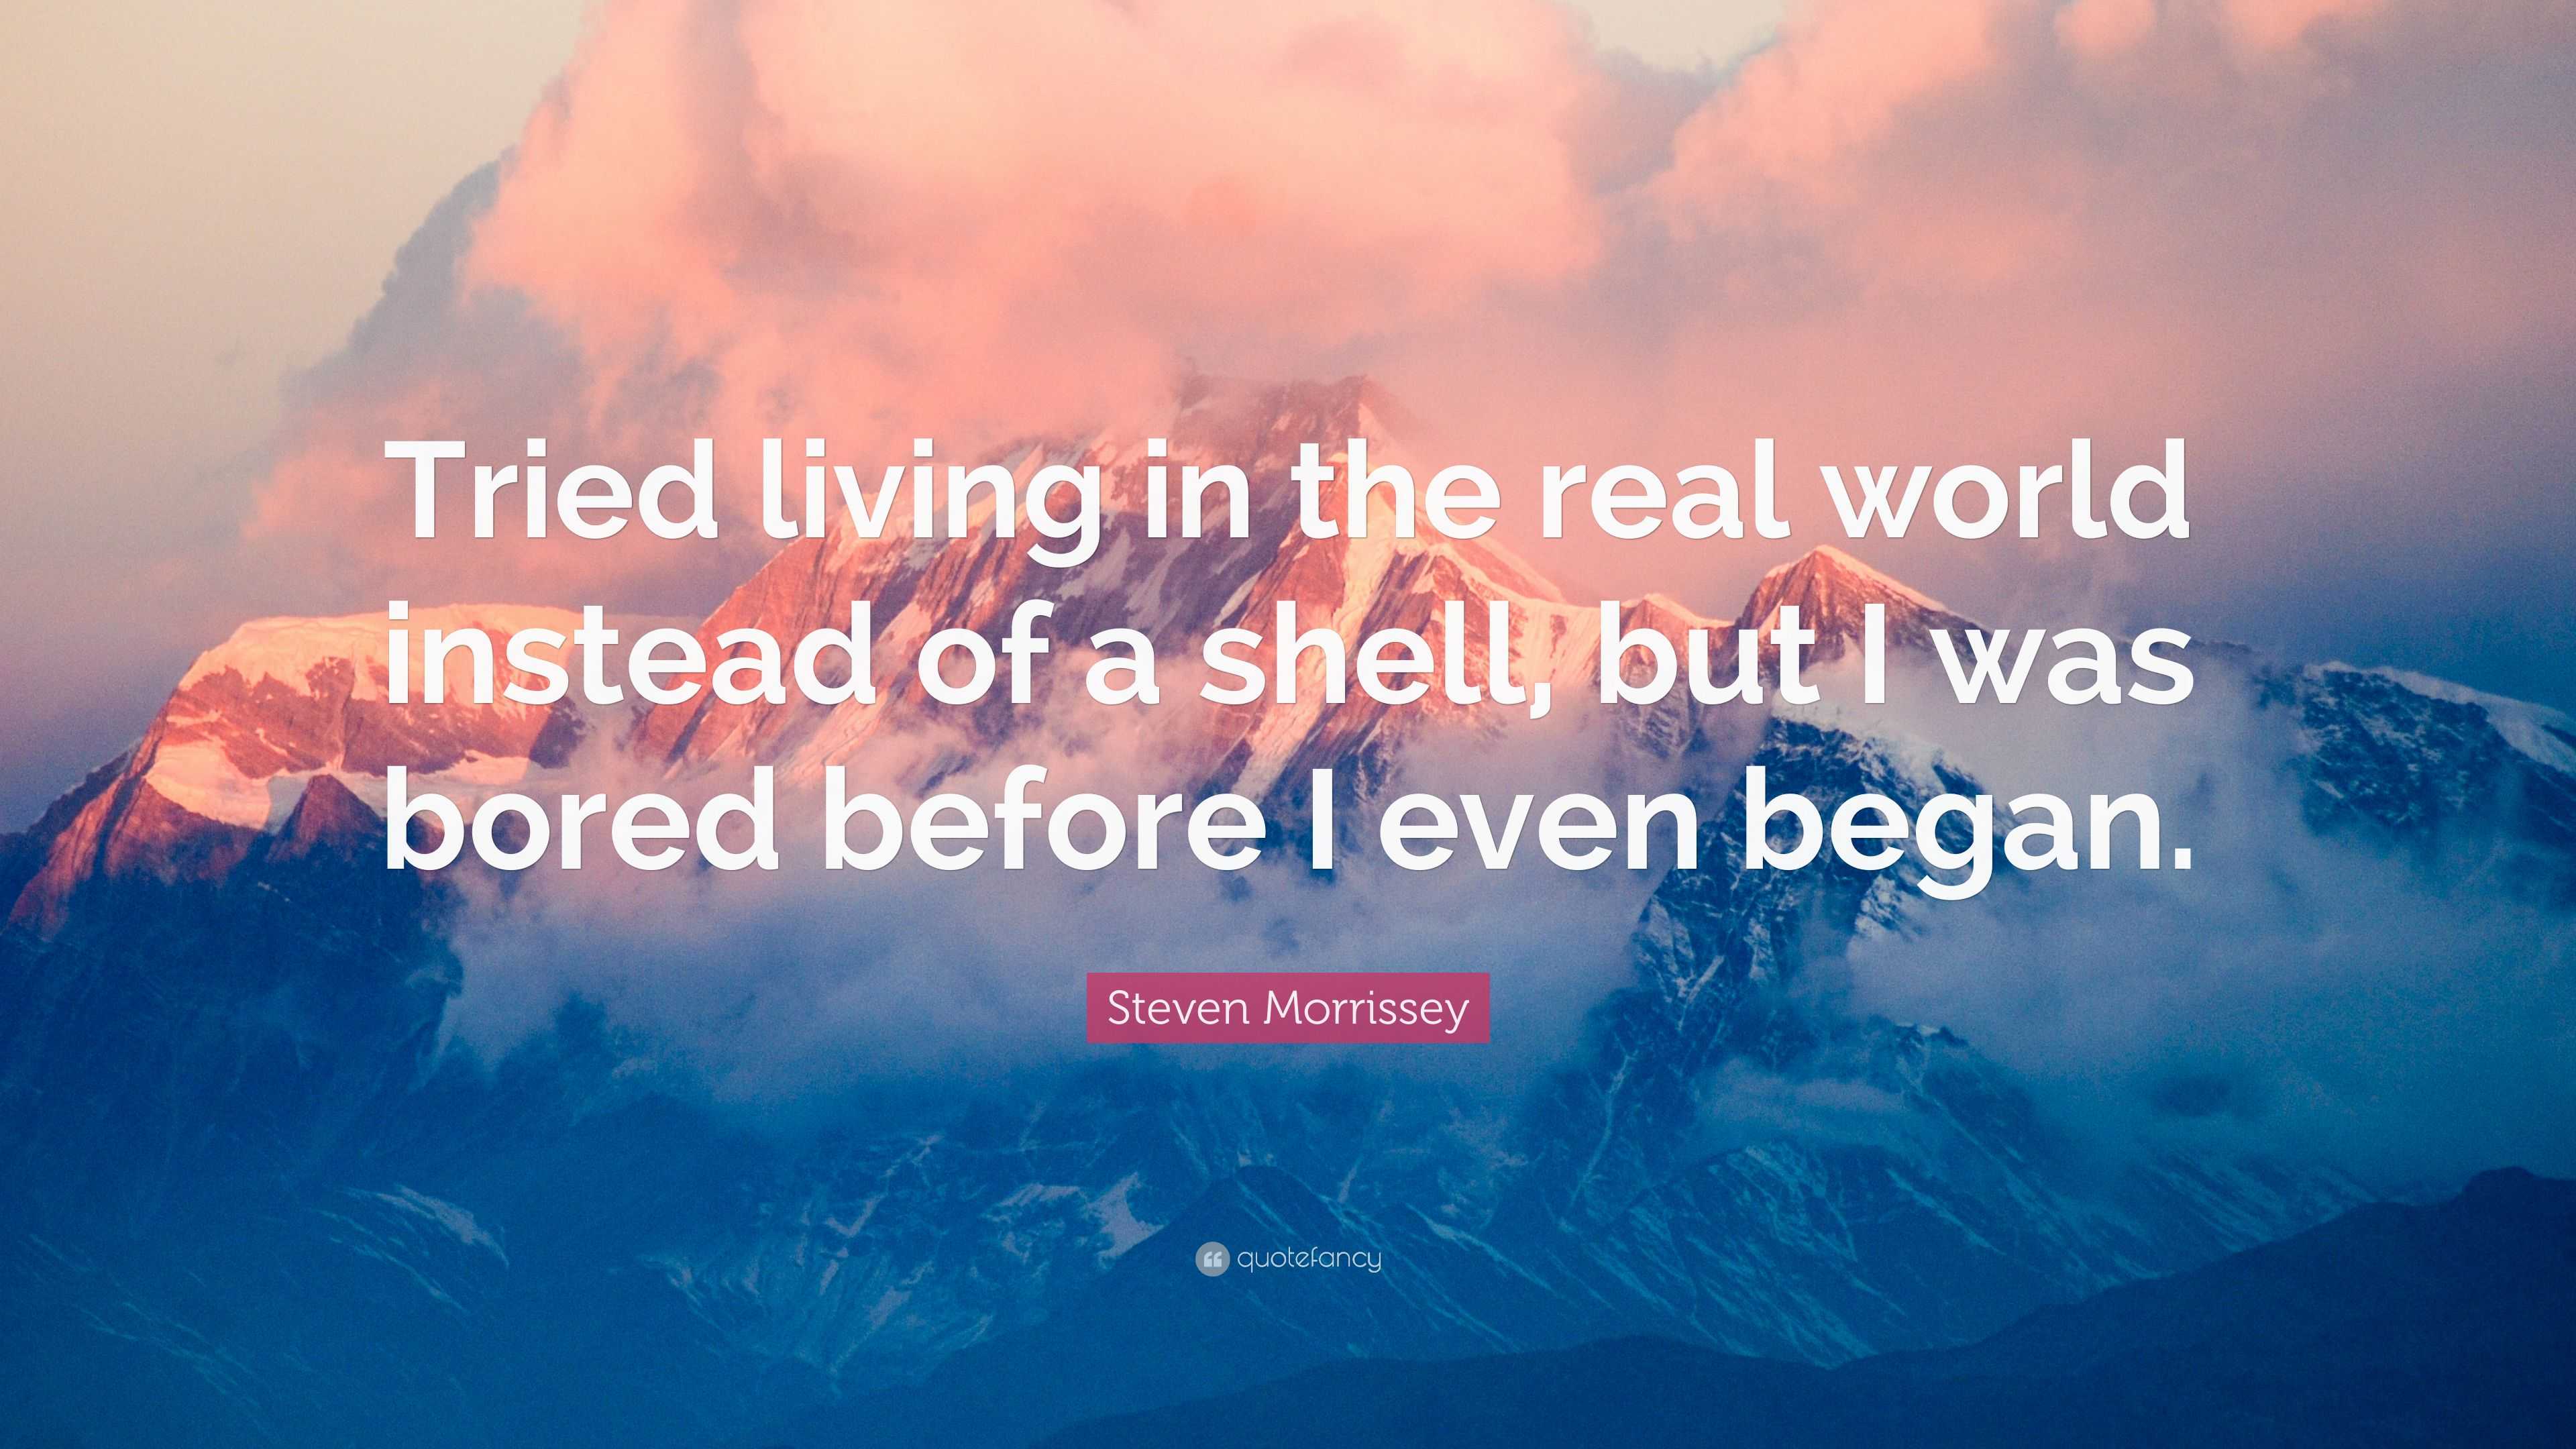 Steven Morrissey Quote: “Tried living in the real world instead of a ...